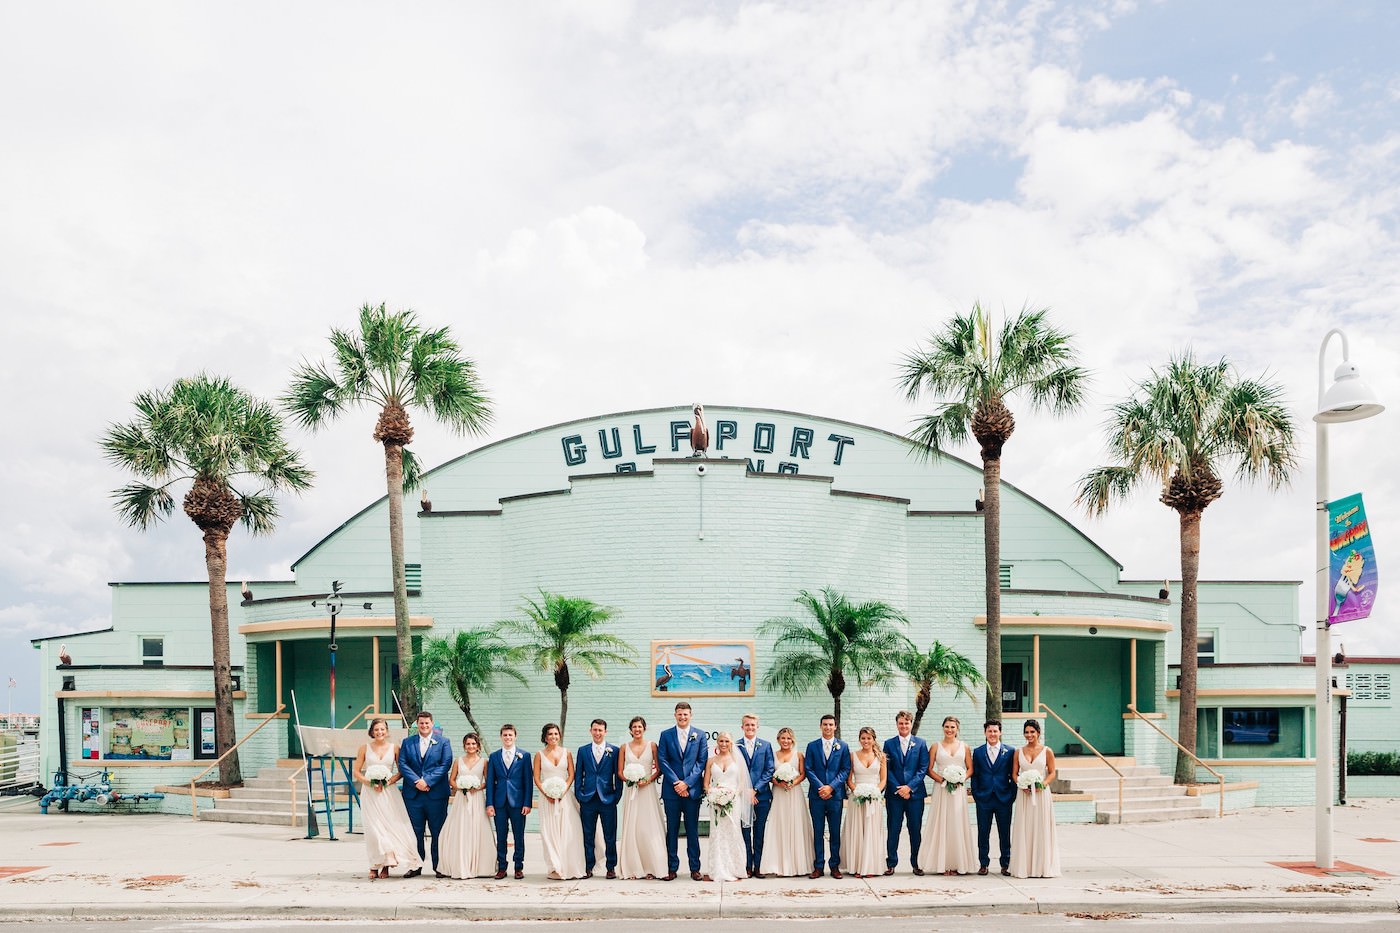 St. Petersburg Florida Wedding | Outdoor Wedding Party Portrait | Neutral Nude Champagne Watters Bridesmaid Dresses from Bella Bridesmaid | White Hydrangea Bouquets with Cascading Ribbon | Groom and Groomsmen in Navy Blue Suits with Nude Pink Neck Ties | Gulfport Casino Wedding